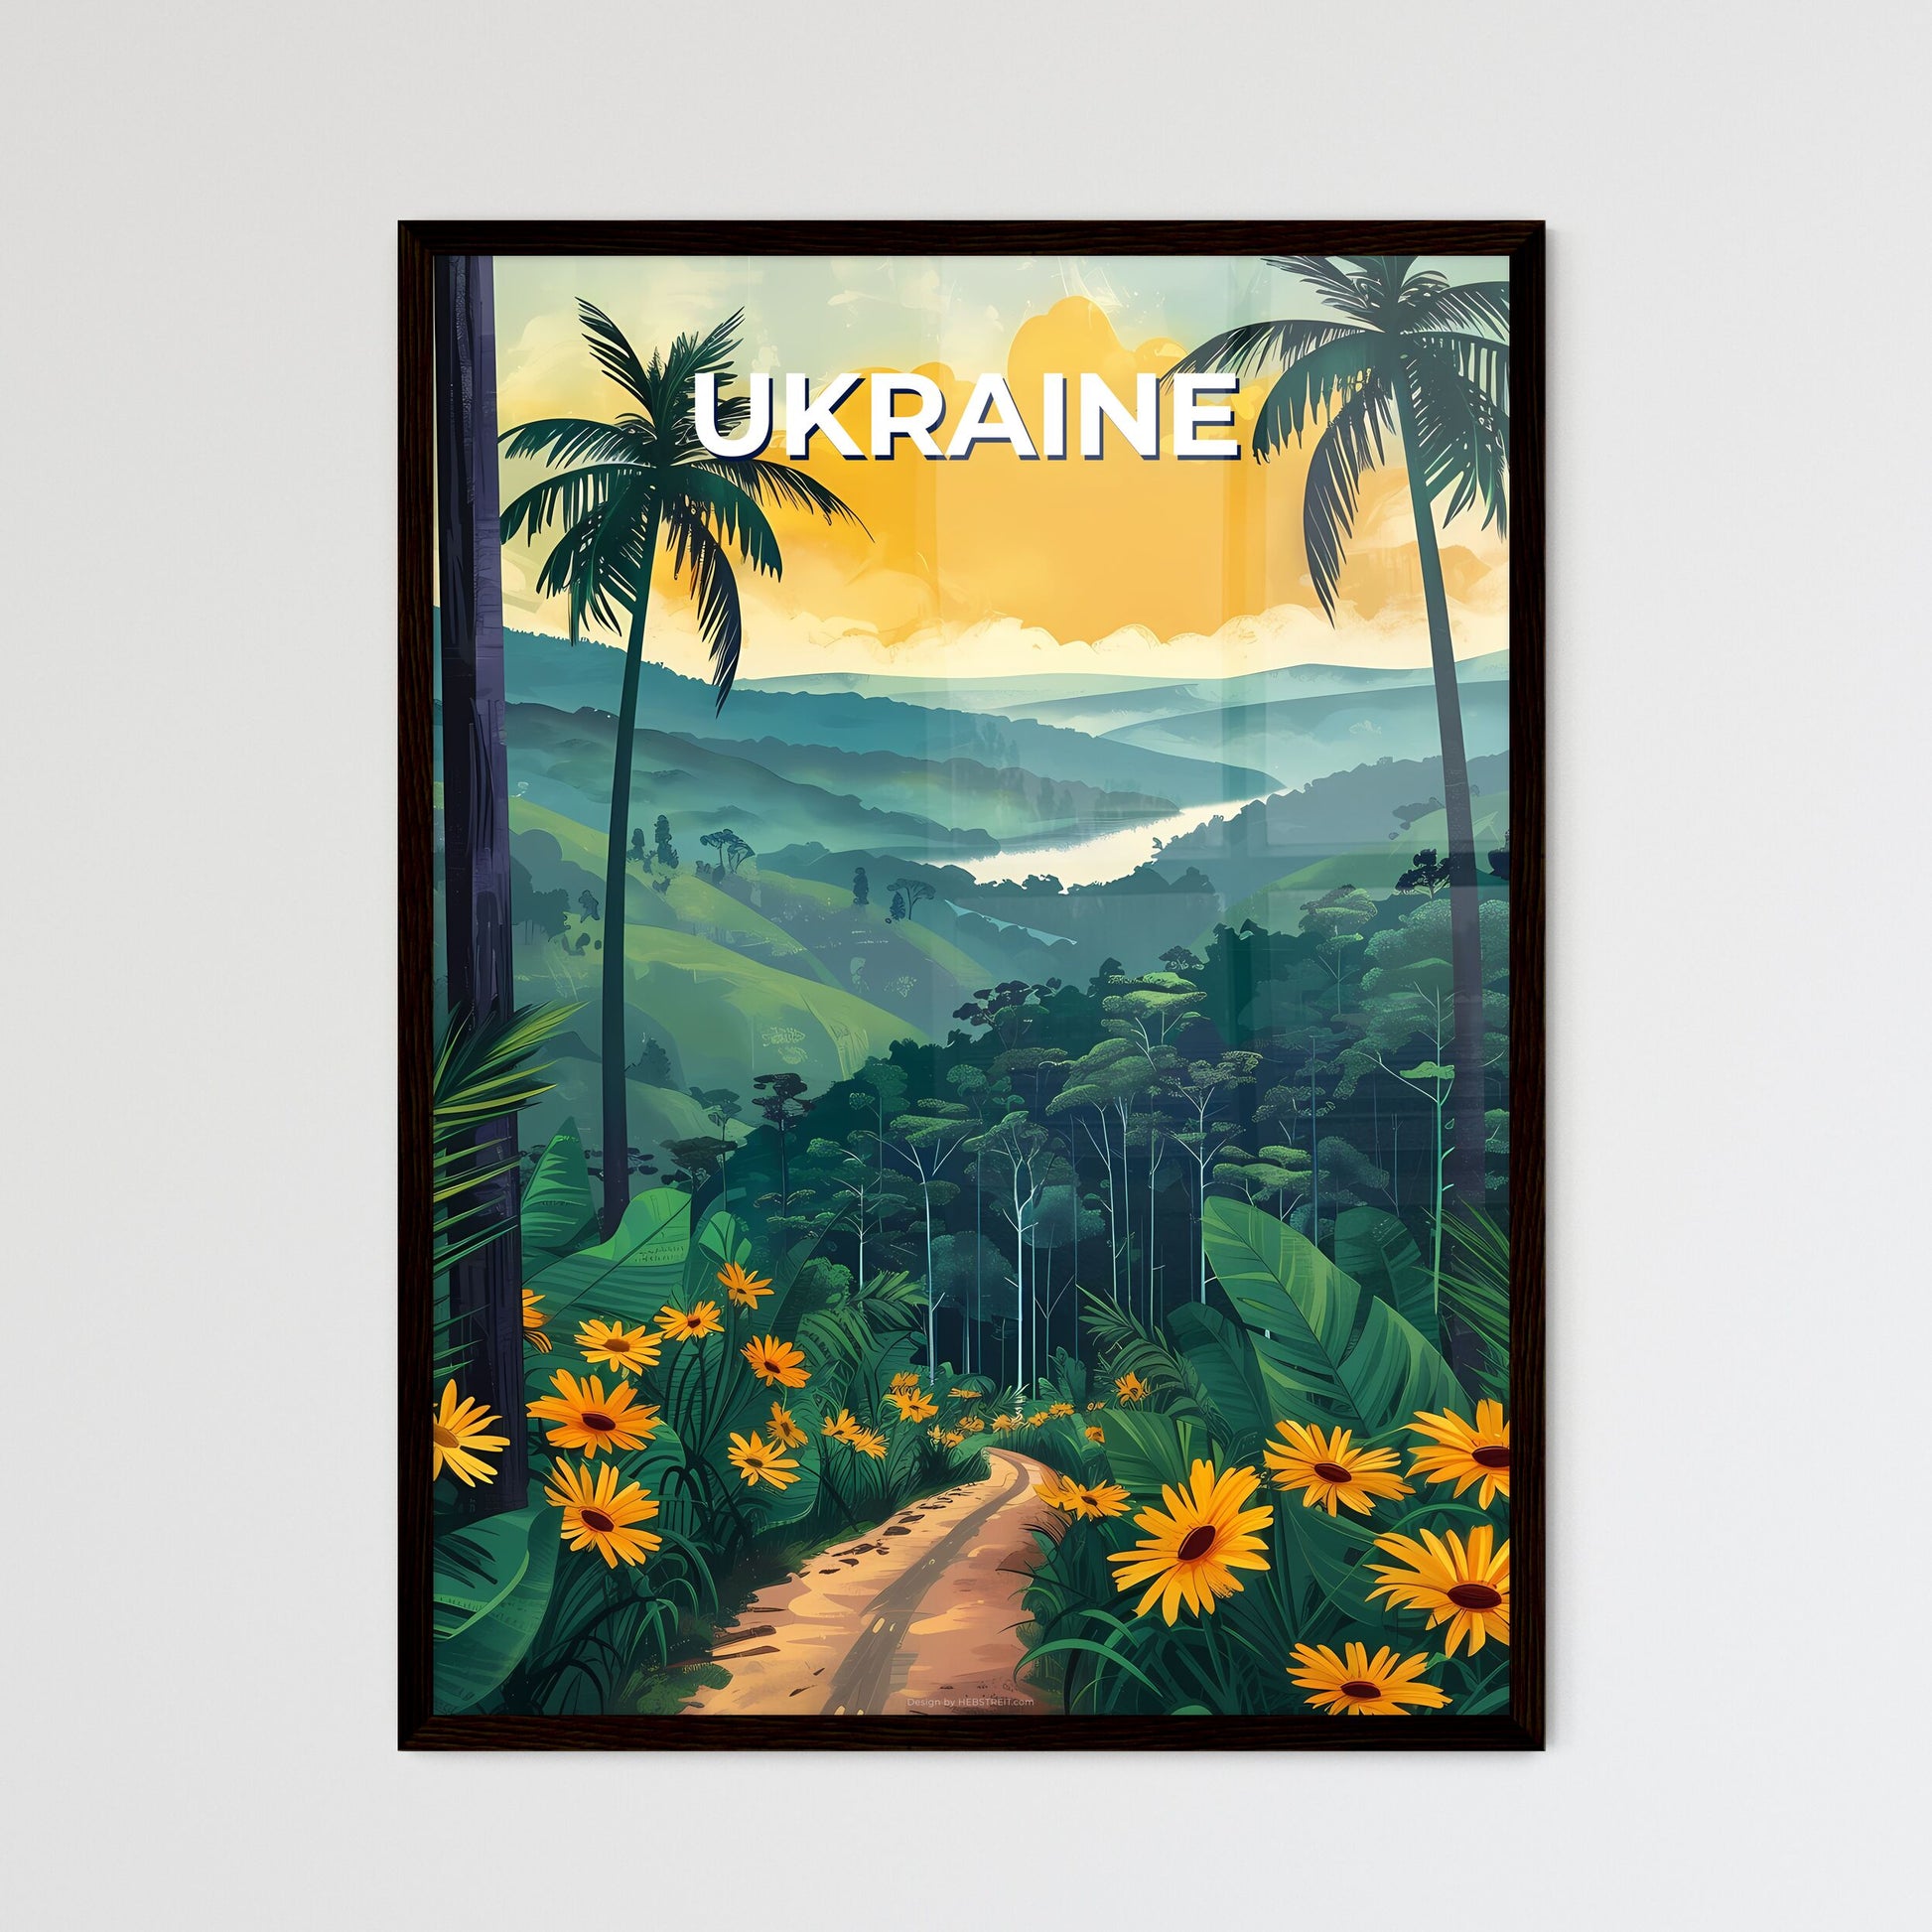 Colourful Painting of a Dirt Road Through a Tropical Forest in Ukraine, Europe